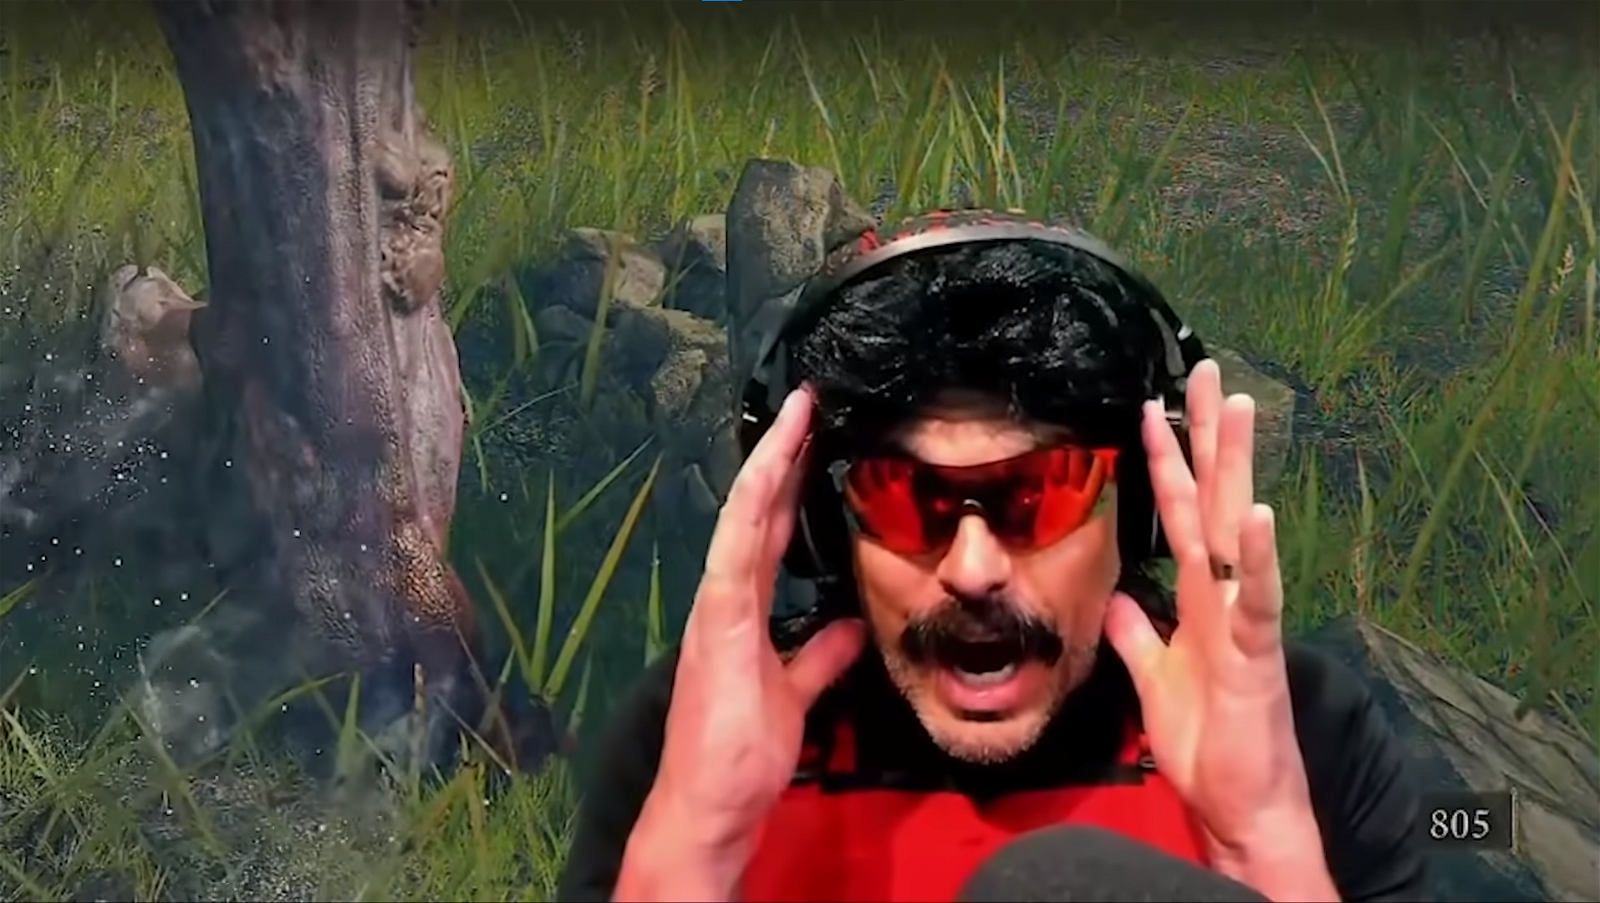 Famous YouTuber DrDisrespect raging while playing the game.